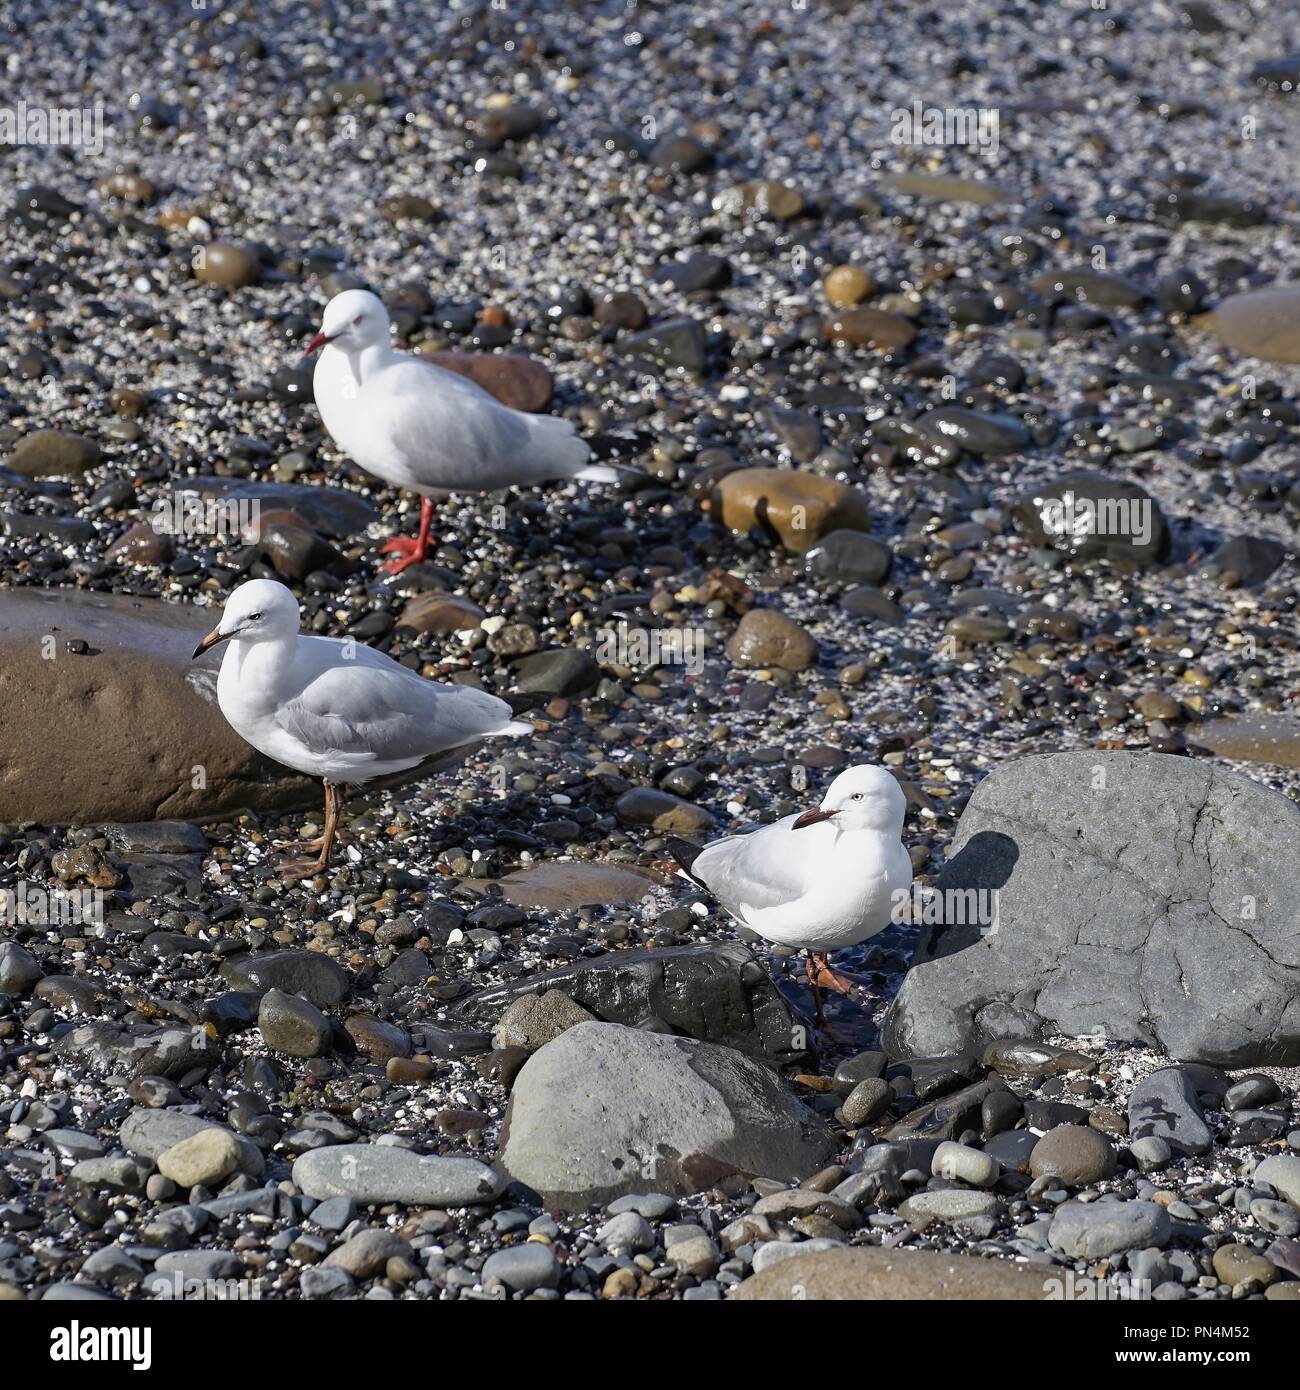 Three Australian Seagulls standing on a rocky and pebble-filled beach. Stock Photo